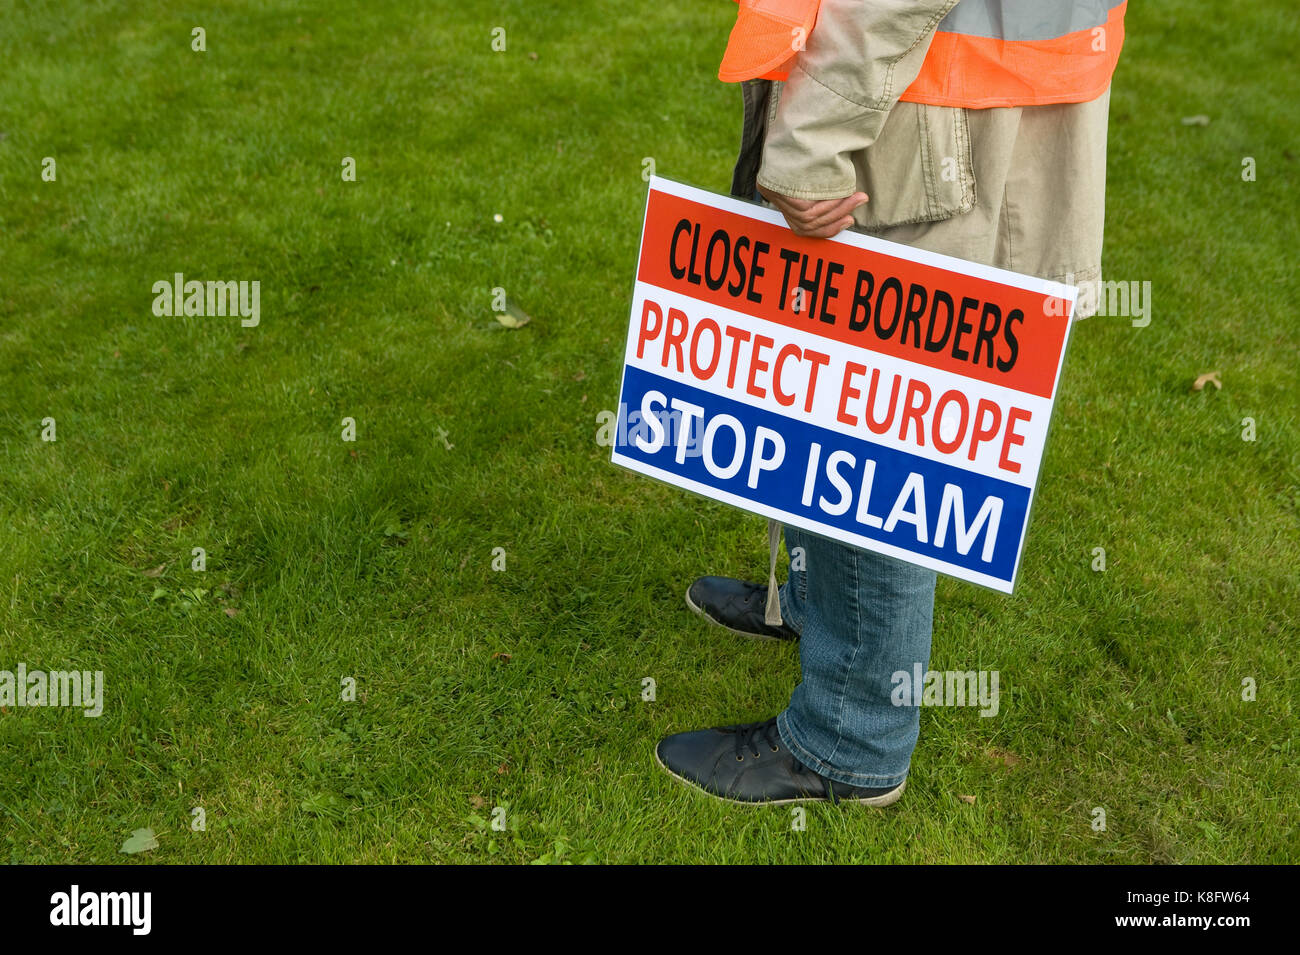 A man is holding a protest sign during an anti islam demonstration of Pegida. Pegida is a group of people who are against the islamization of Europe. Stock Photo